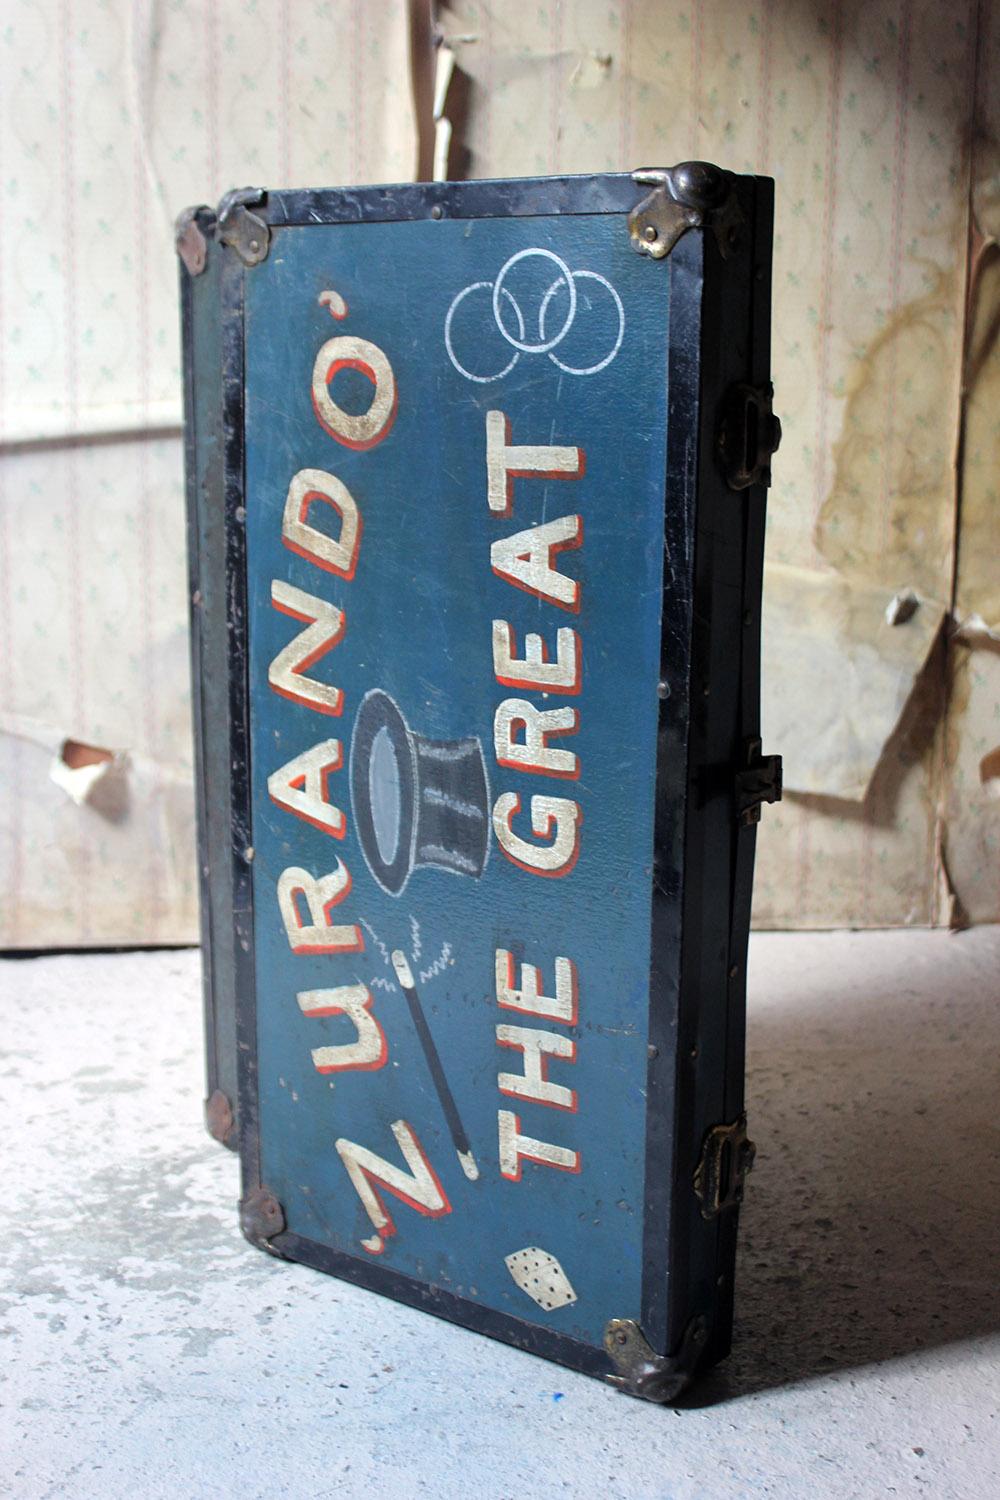 English Early to Mid-20th Century Magicians Suitcase, “Zurando The Great”, circa 1940